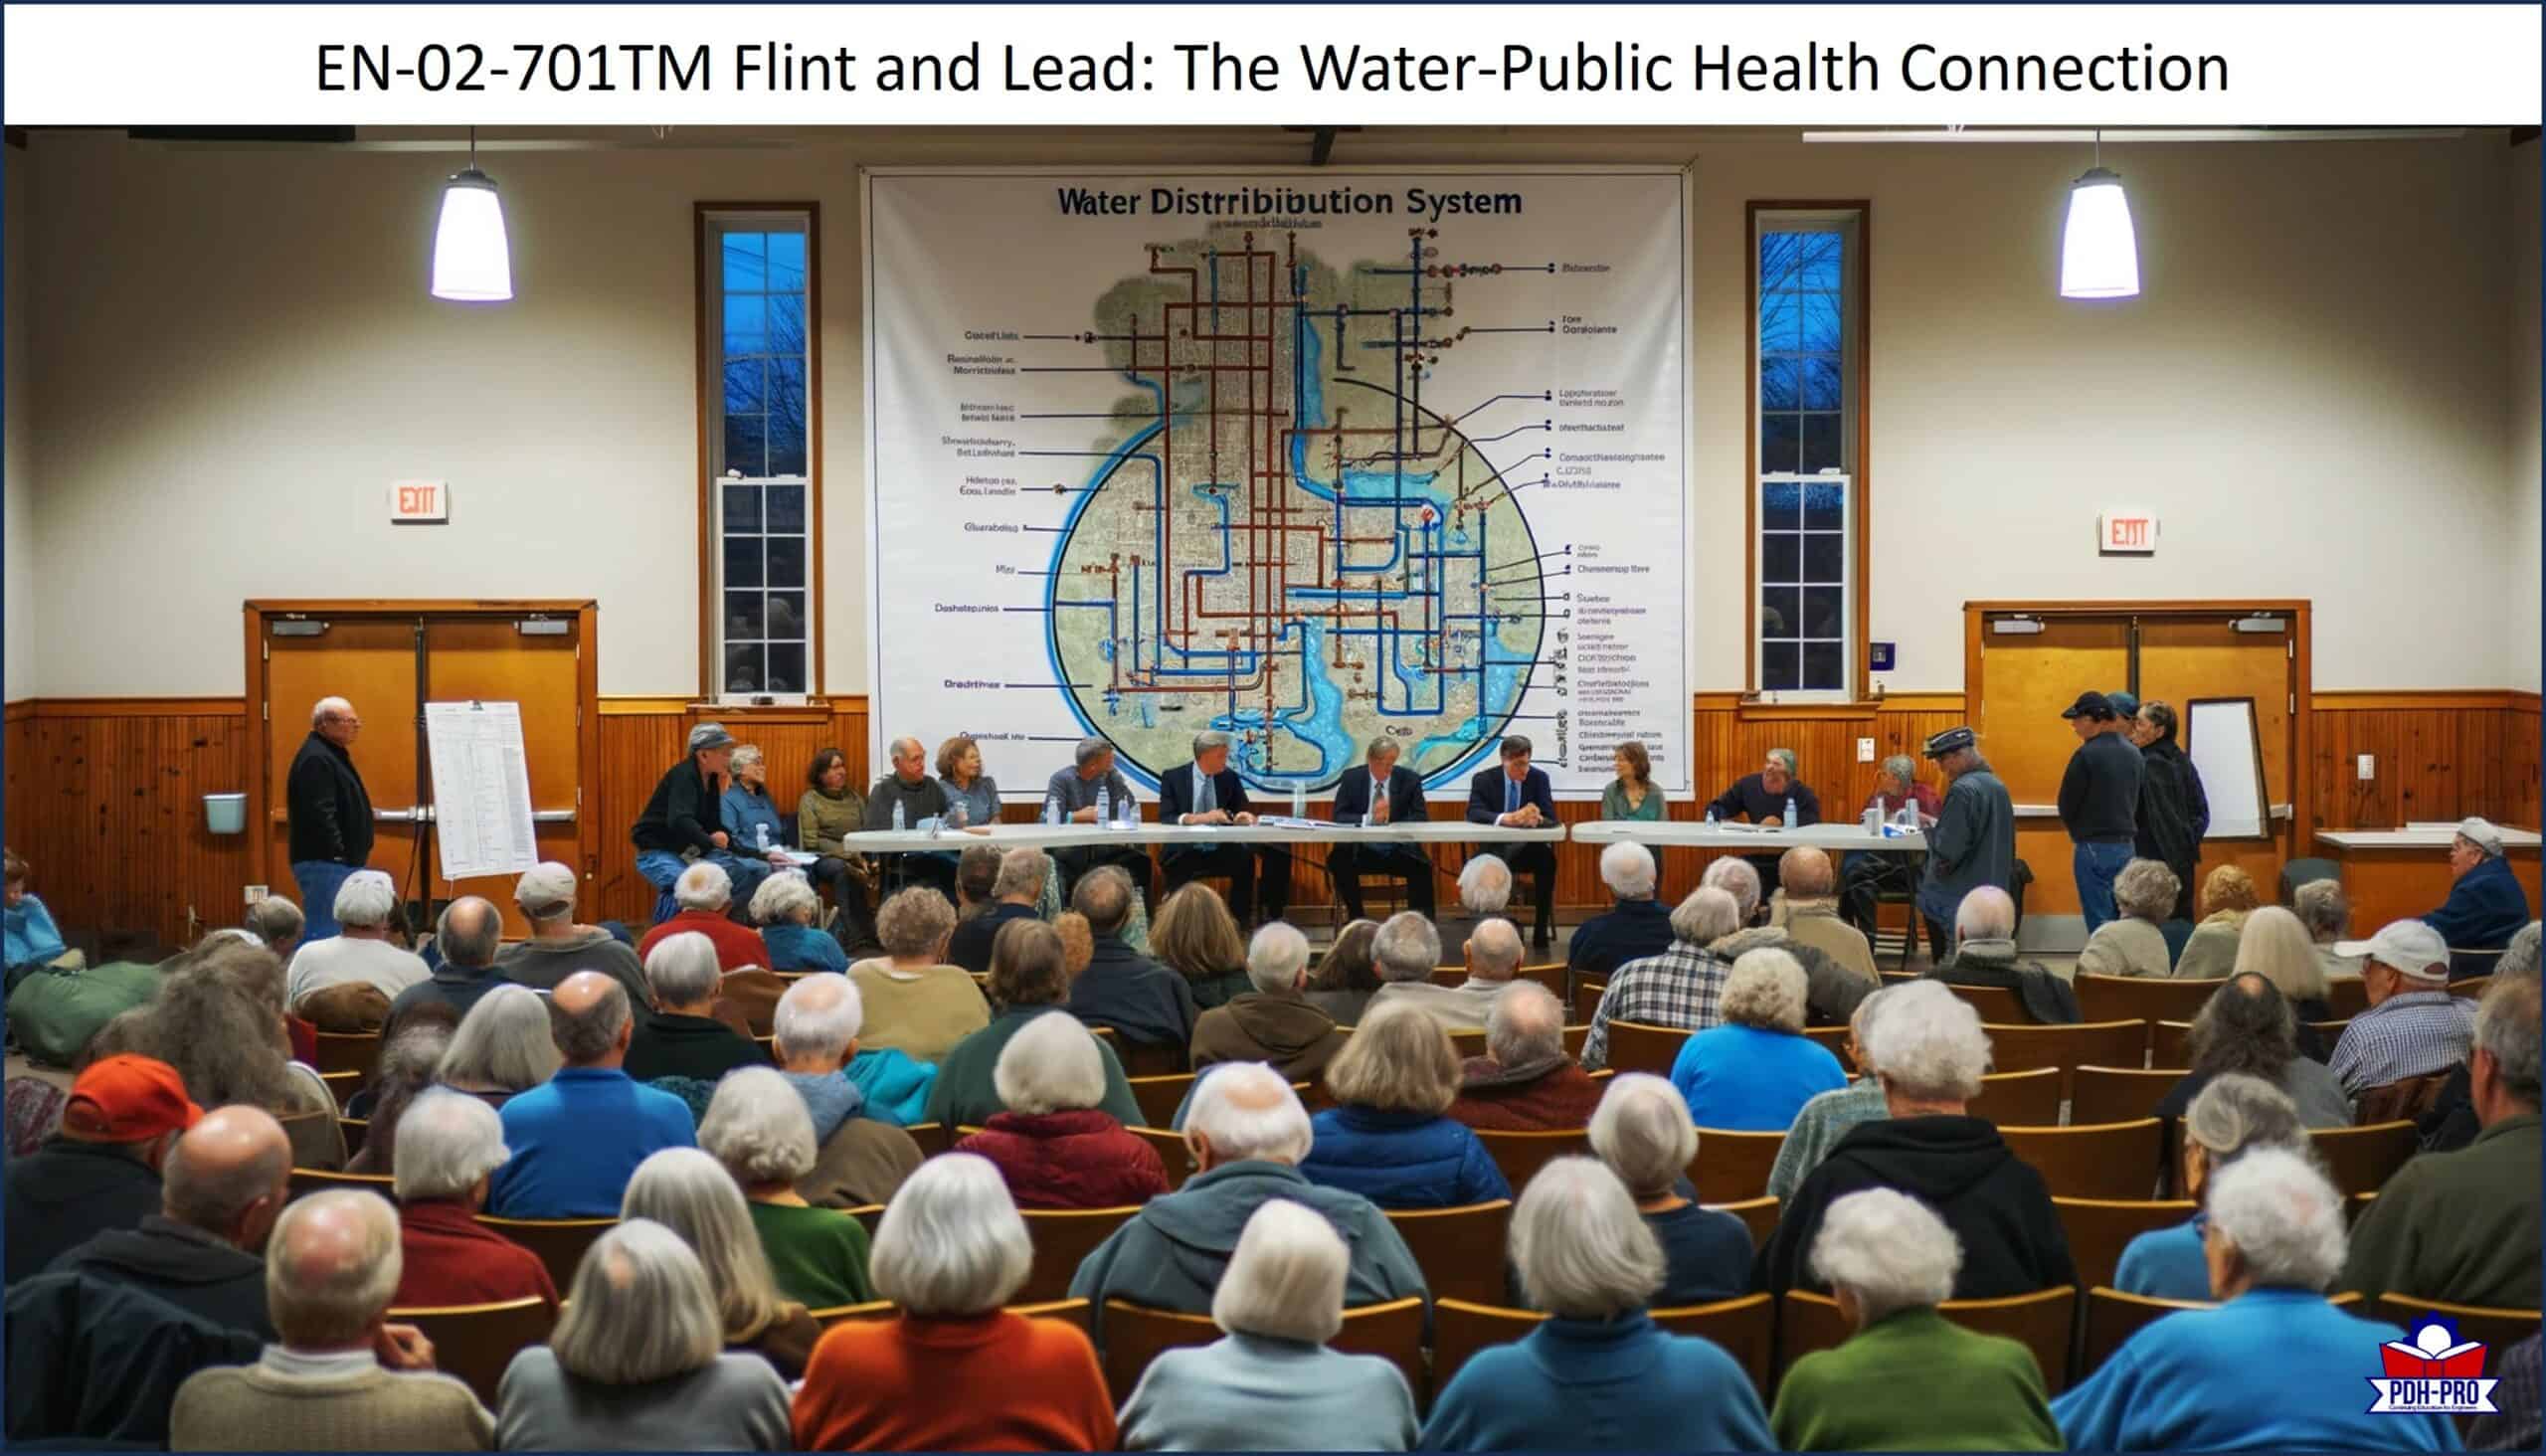 Flint and Lead: The Water-Public Health Connection